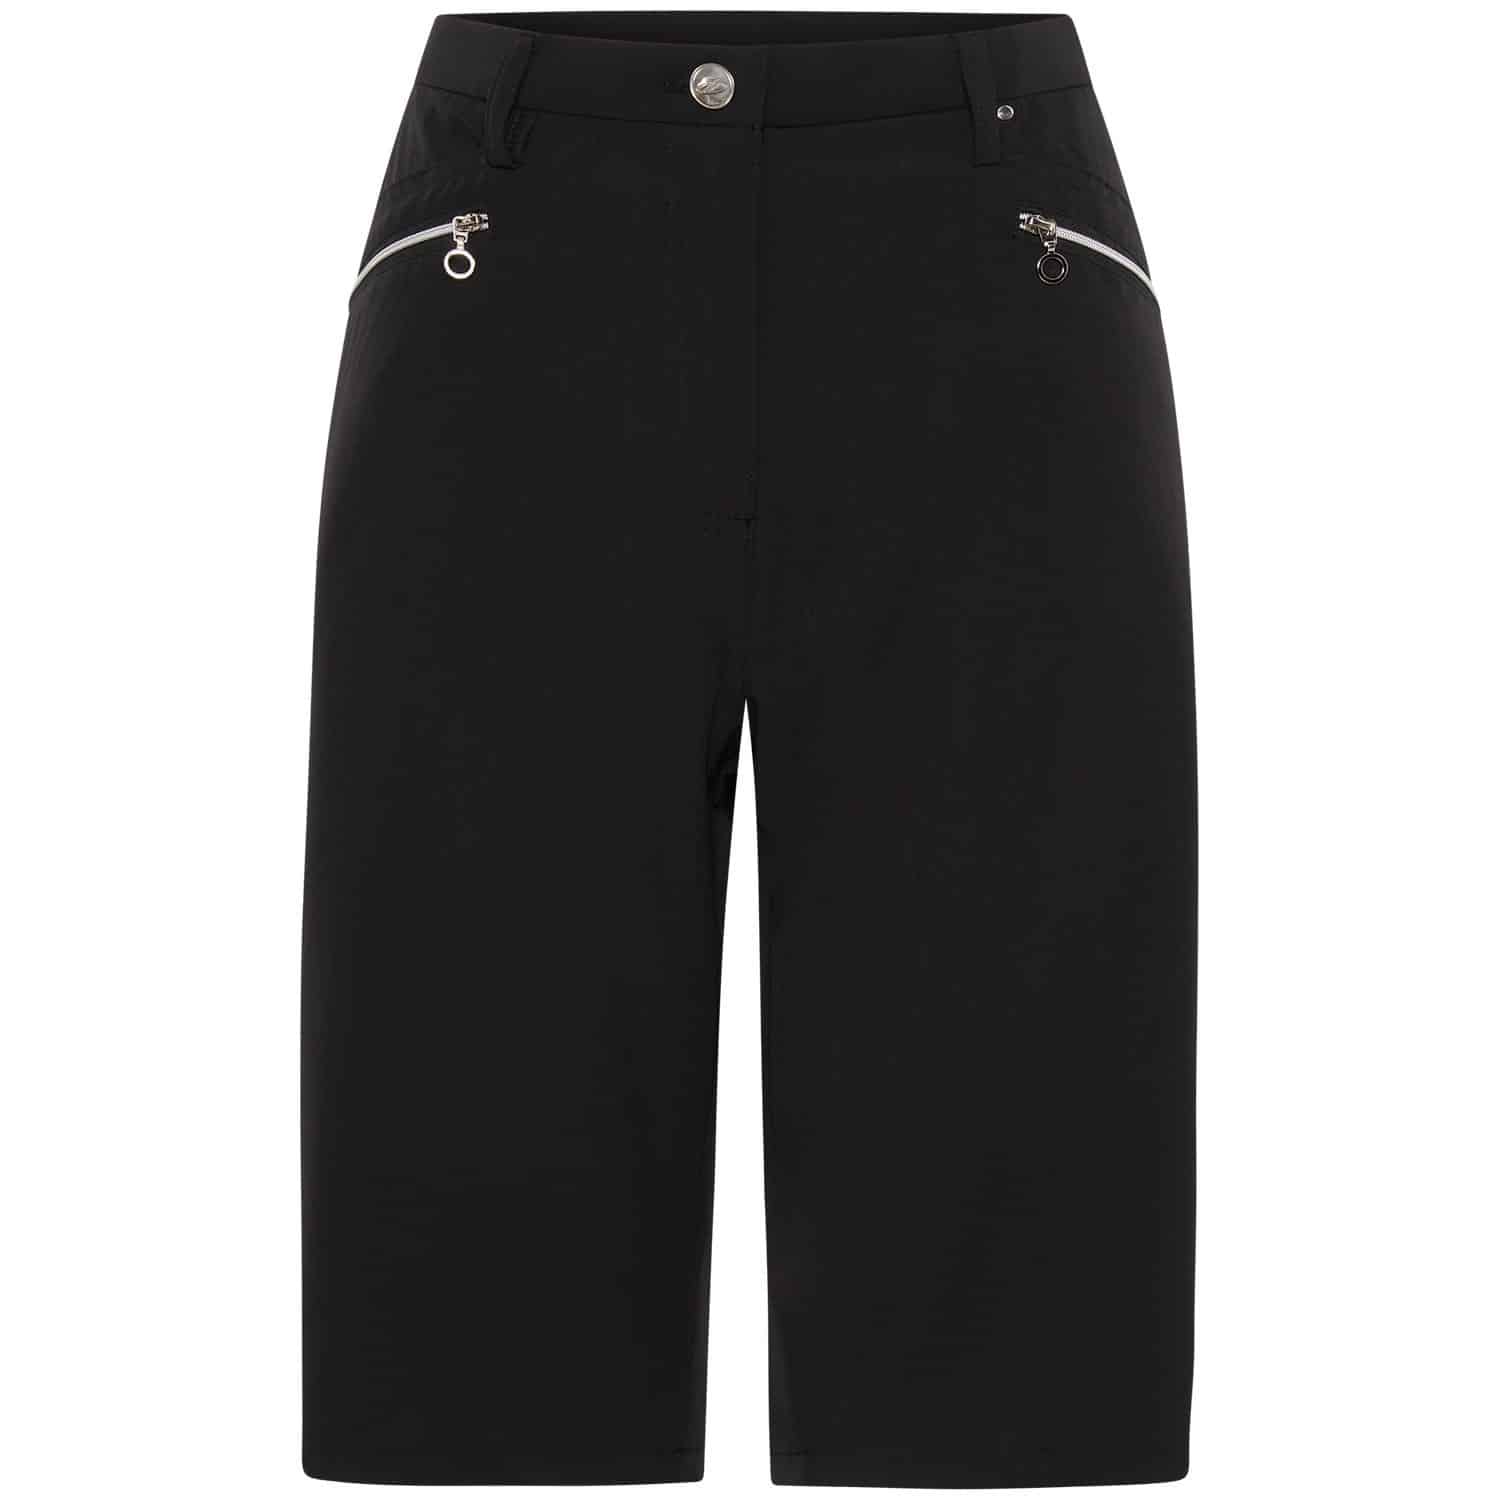 Henselite Ladies Sports Cropped Bowls Trousers